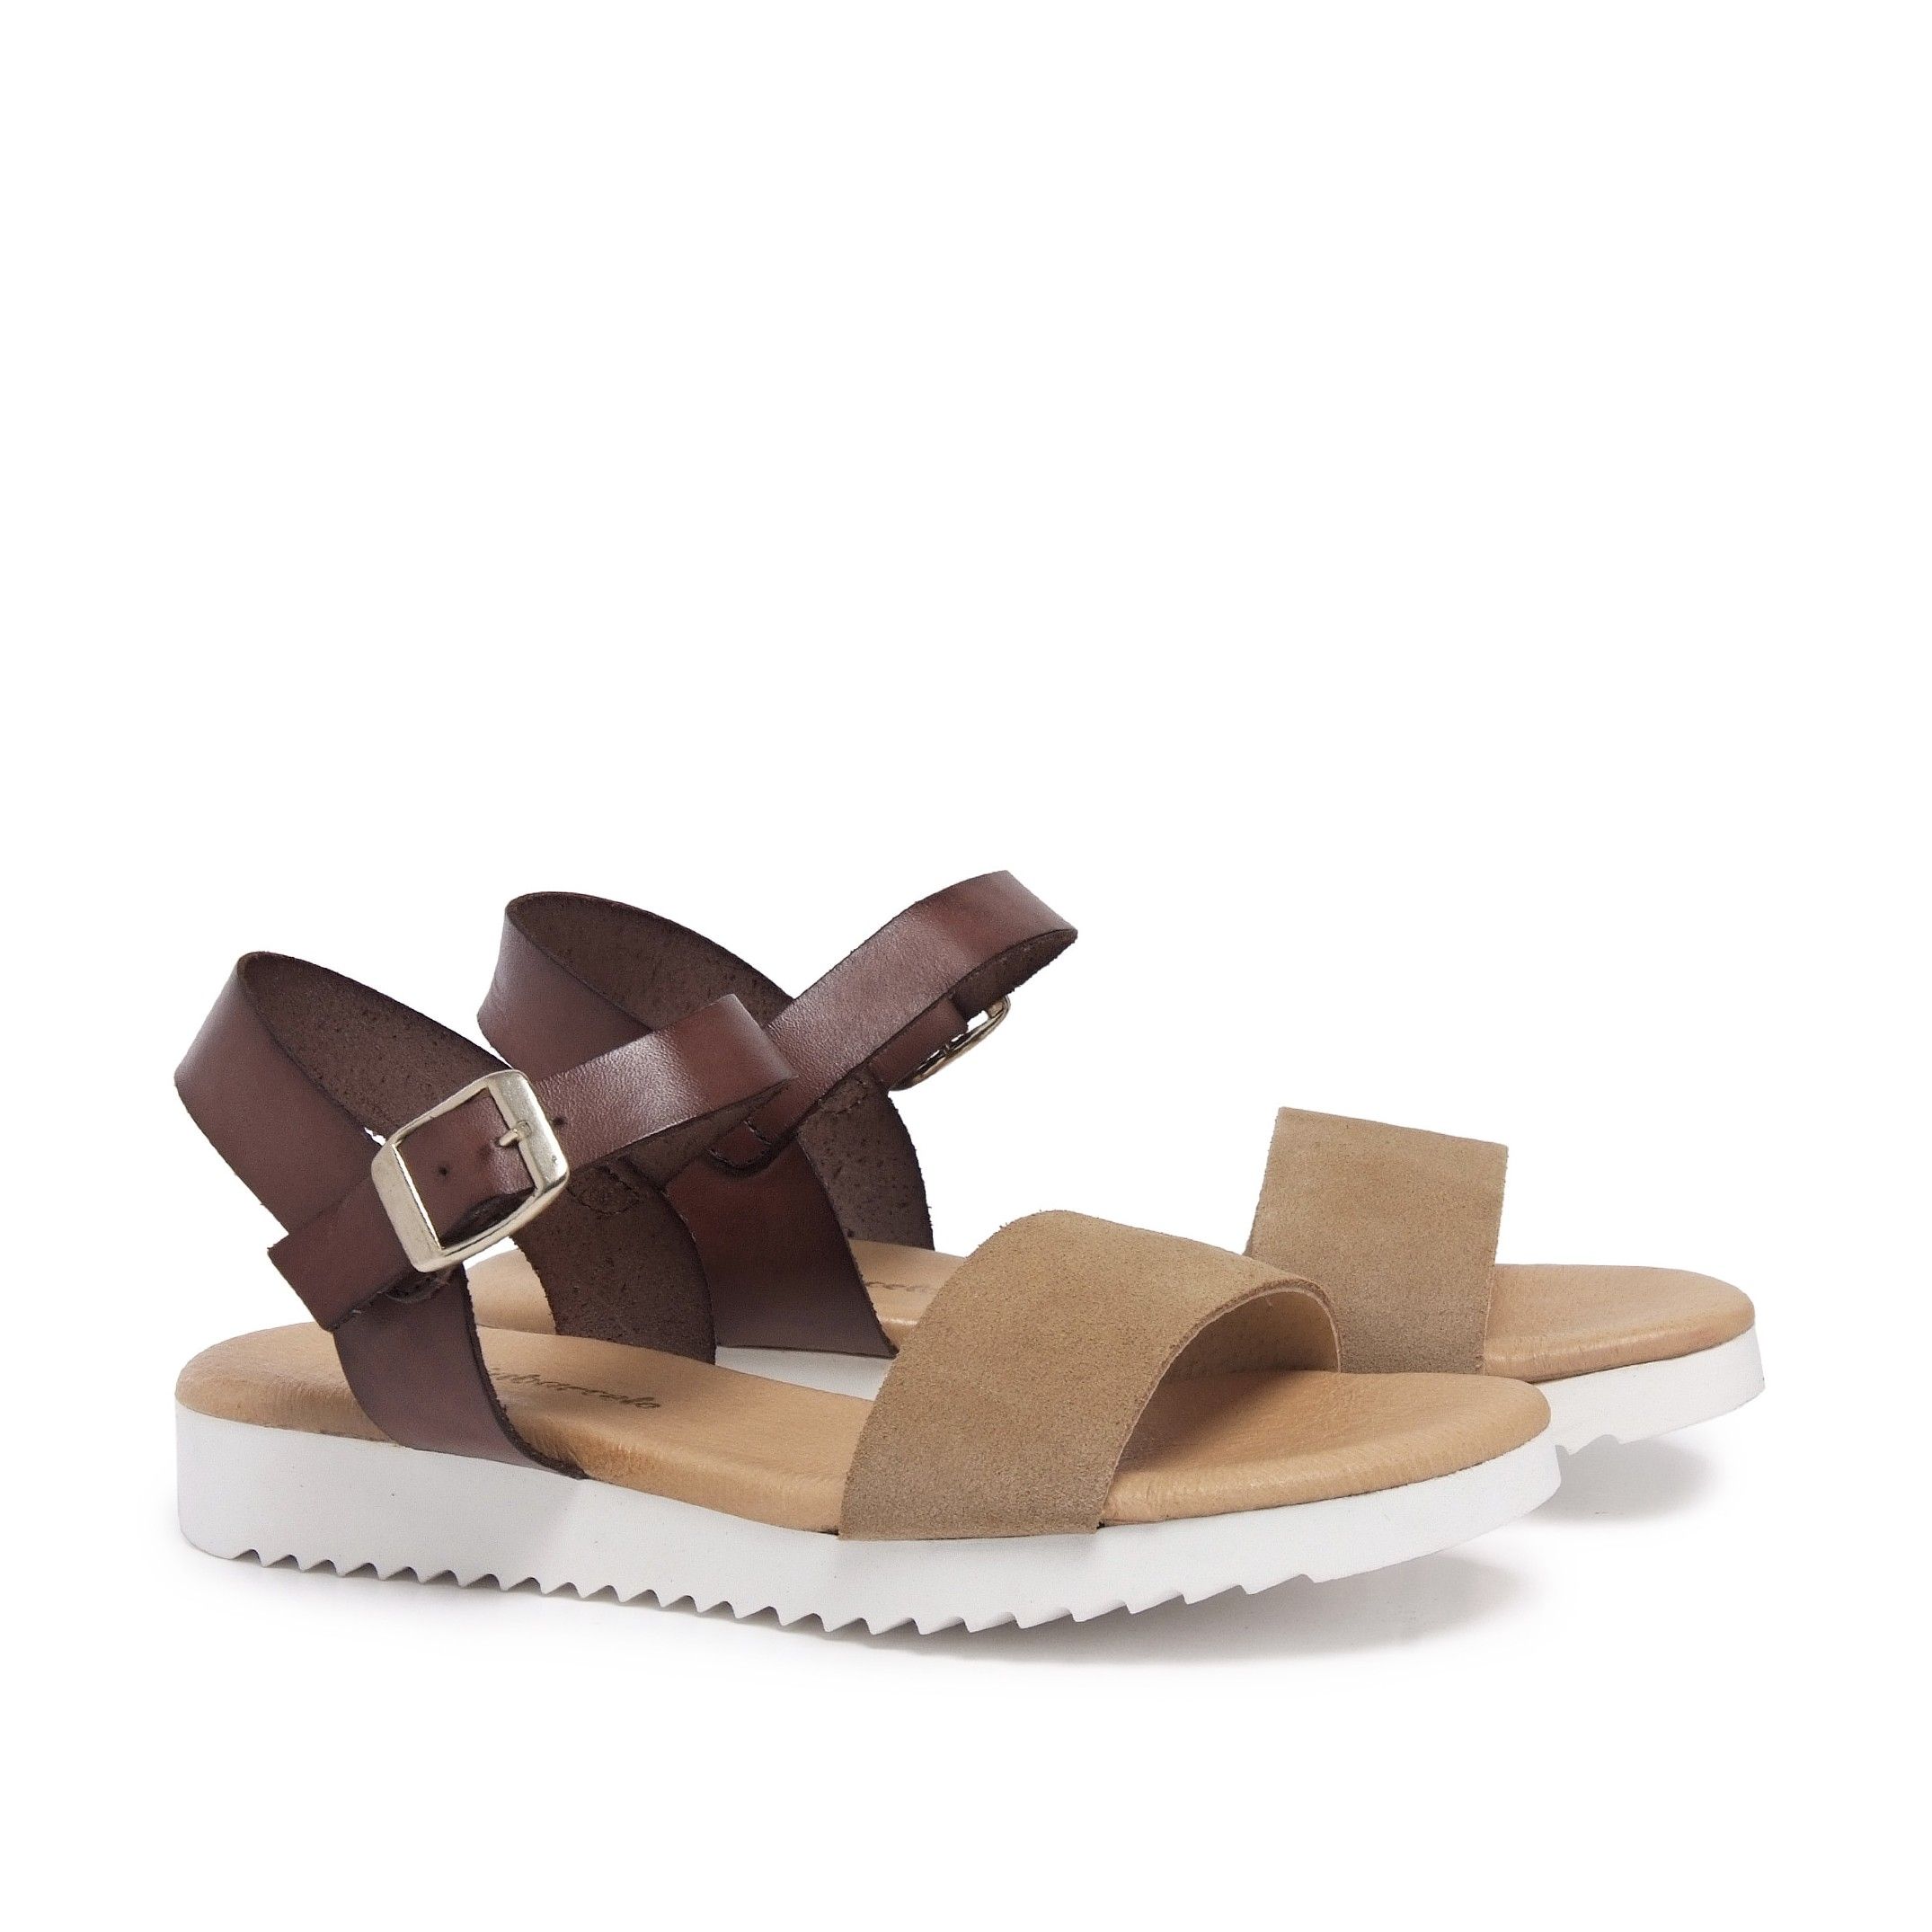 Leather flat sandal with two wide strips. Closure: adjustable metal buckle. Upper: lether. Inner: tissue. Insole: leather. Wedge: 2,5 cm. Platform: 1 cm. Sole: Non-skid TR. MADE IN SPAIN.